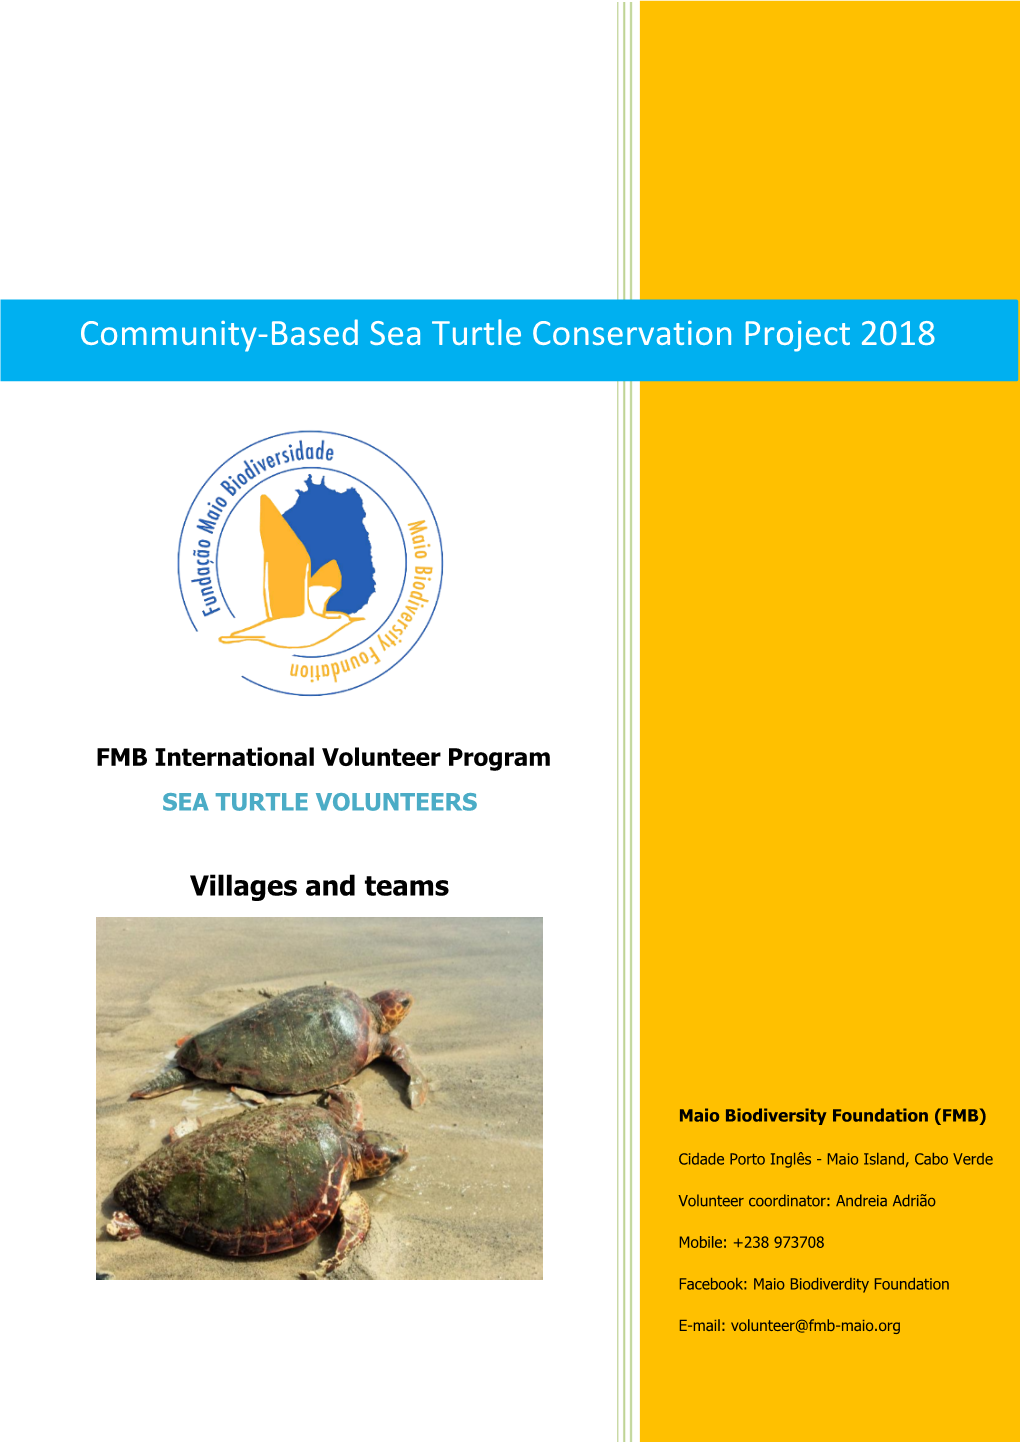 Community-Based Sea Turtle Conservation Project 2018